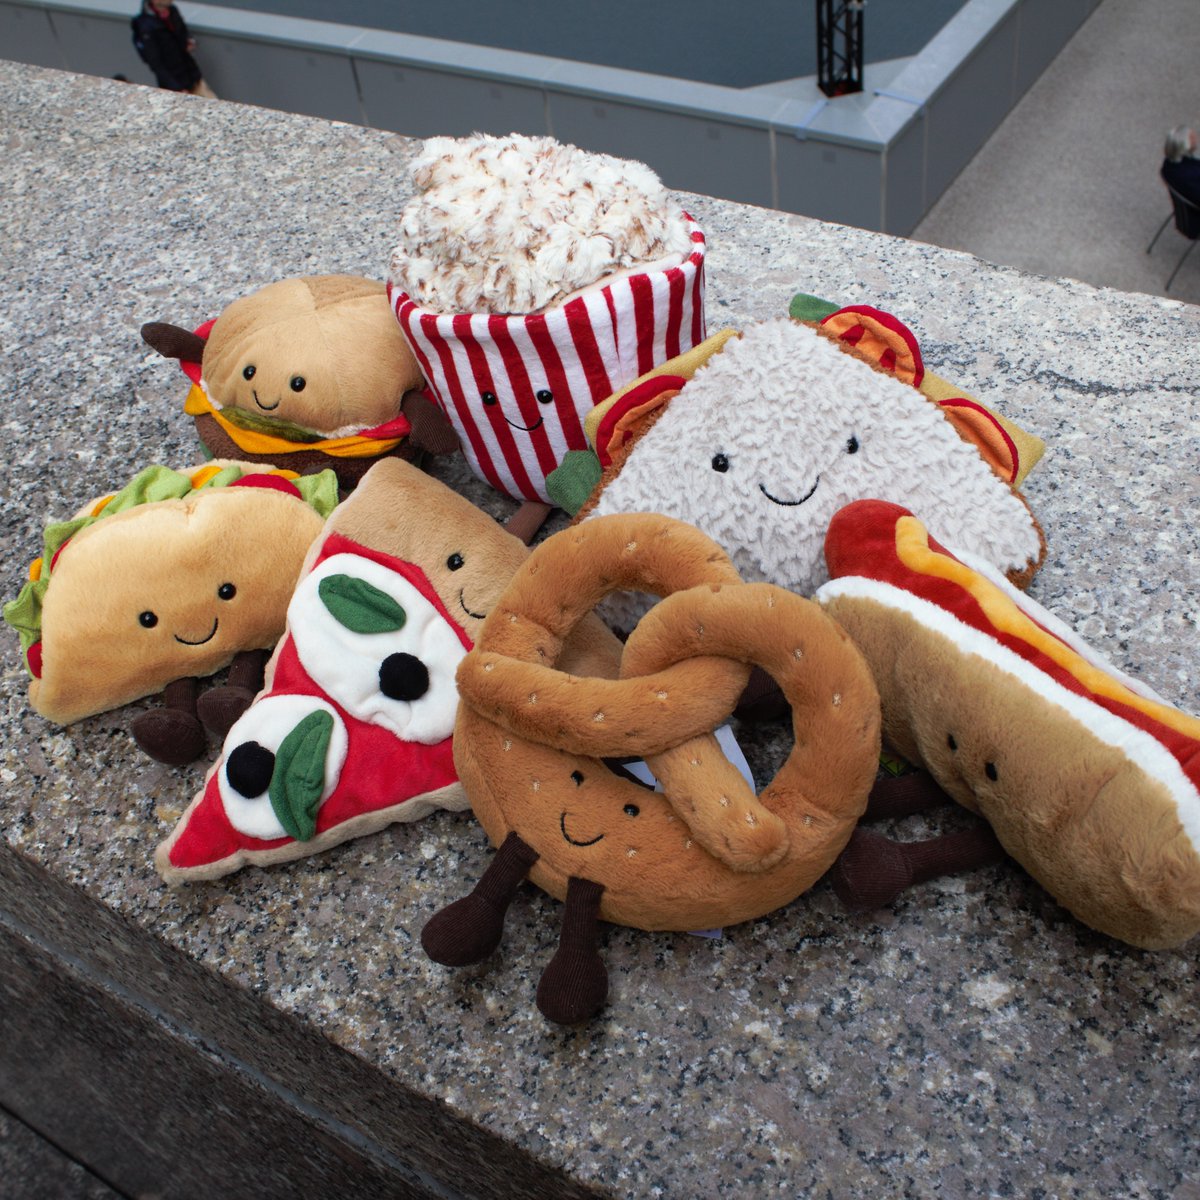 Burgers, hot dogs, and pizzas?!🍔🌭🍕 What's your top choice for the long weekend? 😋 #FAOSchwarz #Jellycat #MemorialDay #burgers #hotdogs #pretzel #popcorn #sandwiches #tacos #InternationalBurgerDay